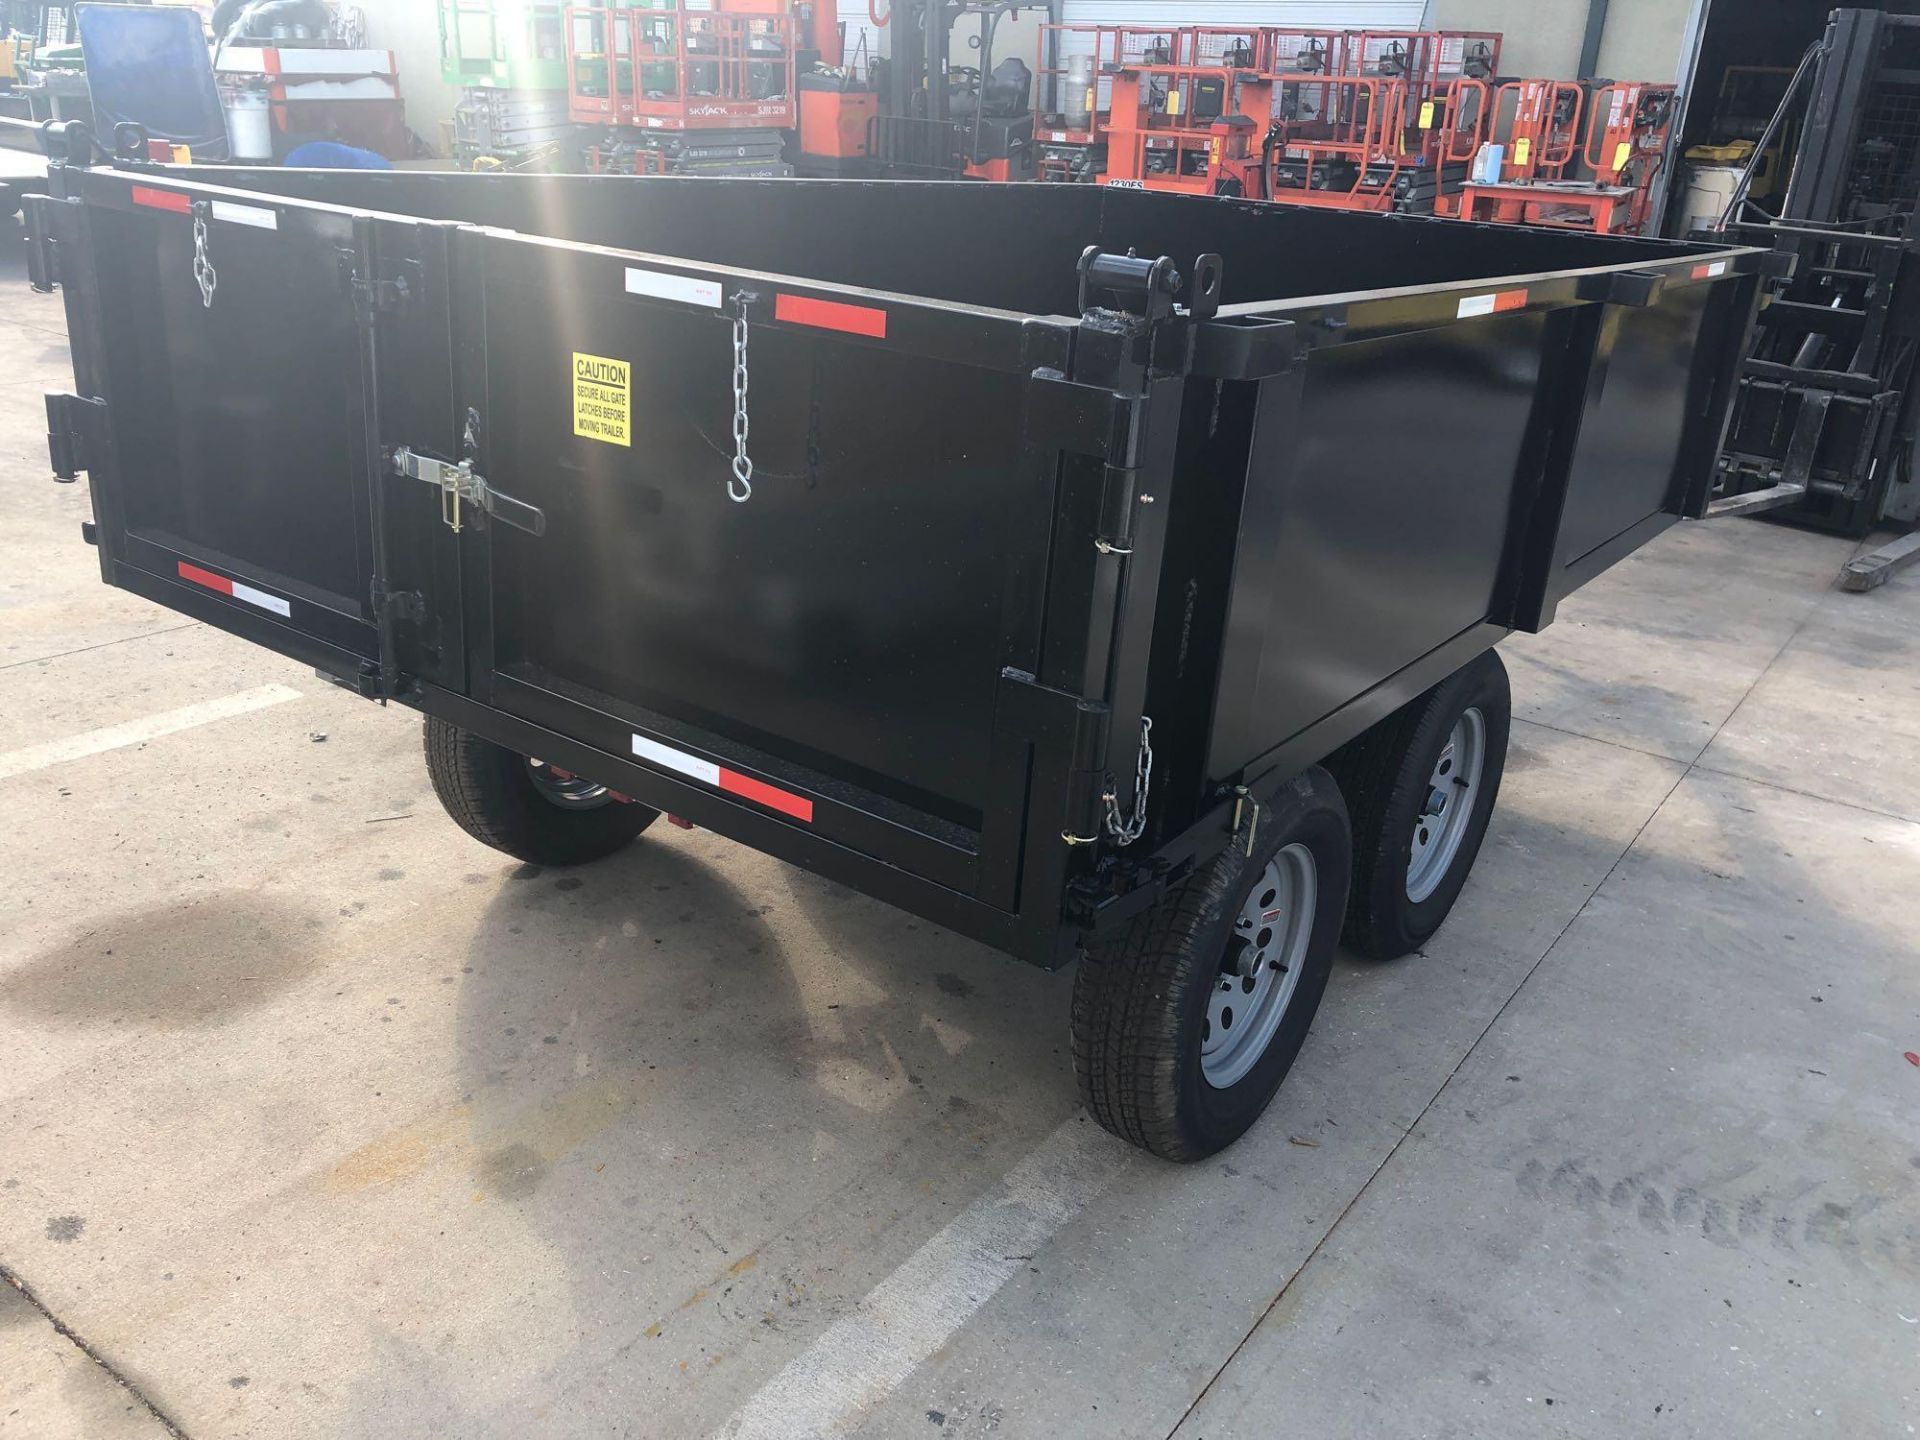 2019 SS DUMP TRIALER W/ ELECTRIC REMOTE, DUAL AXLE, 7,000 LB GVWR - Image 6 of 11